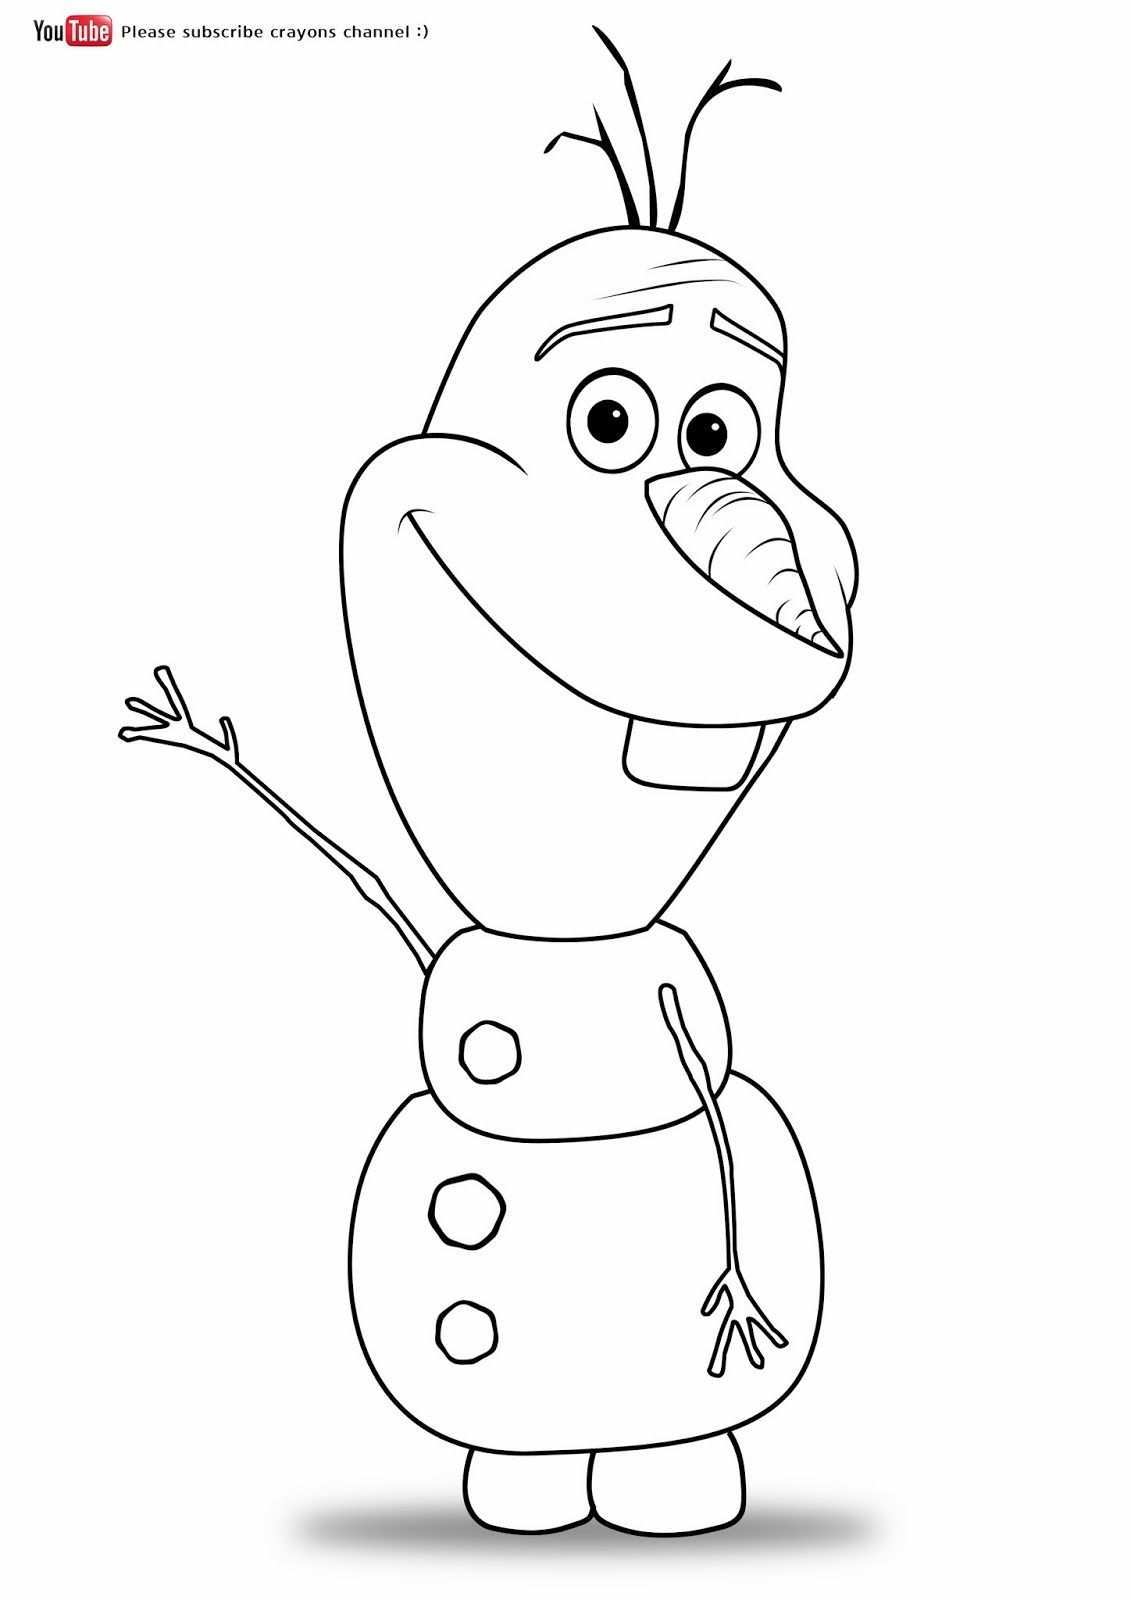 Frozen Olaf Coloring Pages For Kids Snowman Coloring Pages Frozen Coloring Pages Froz